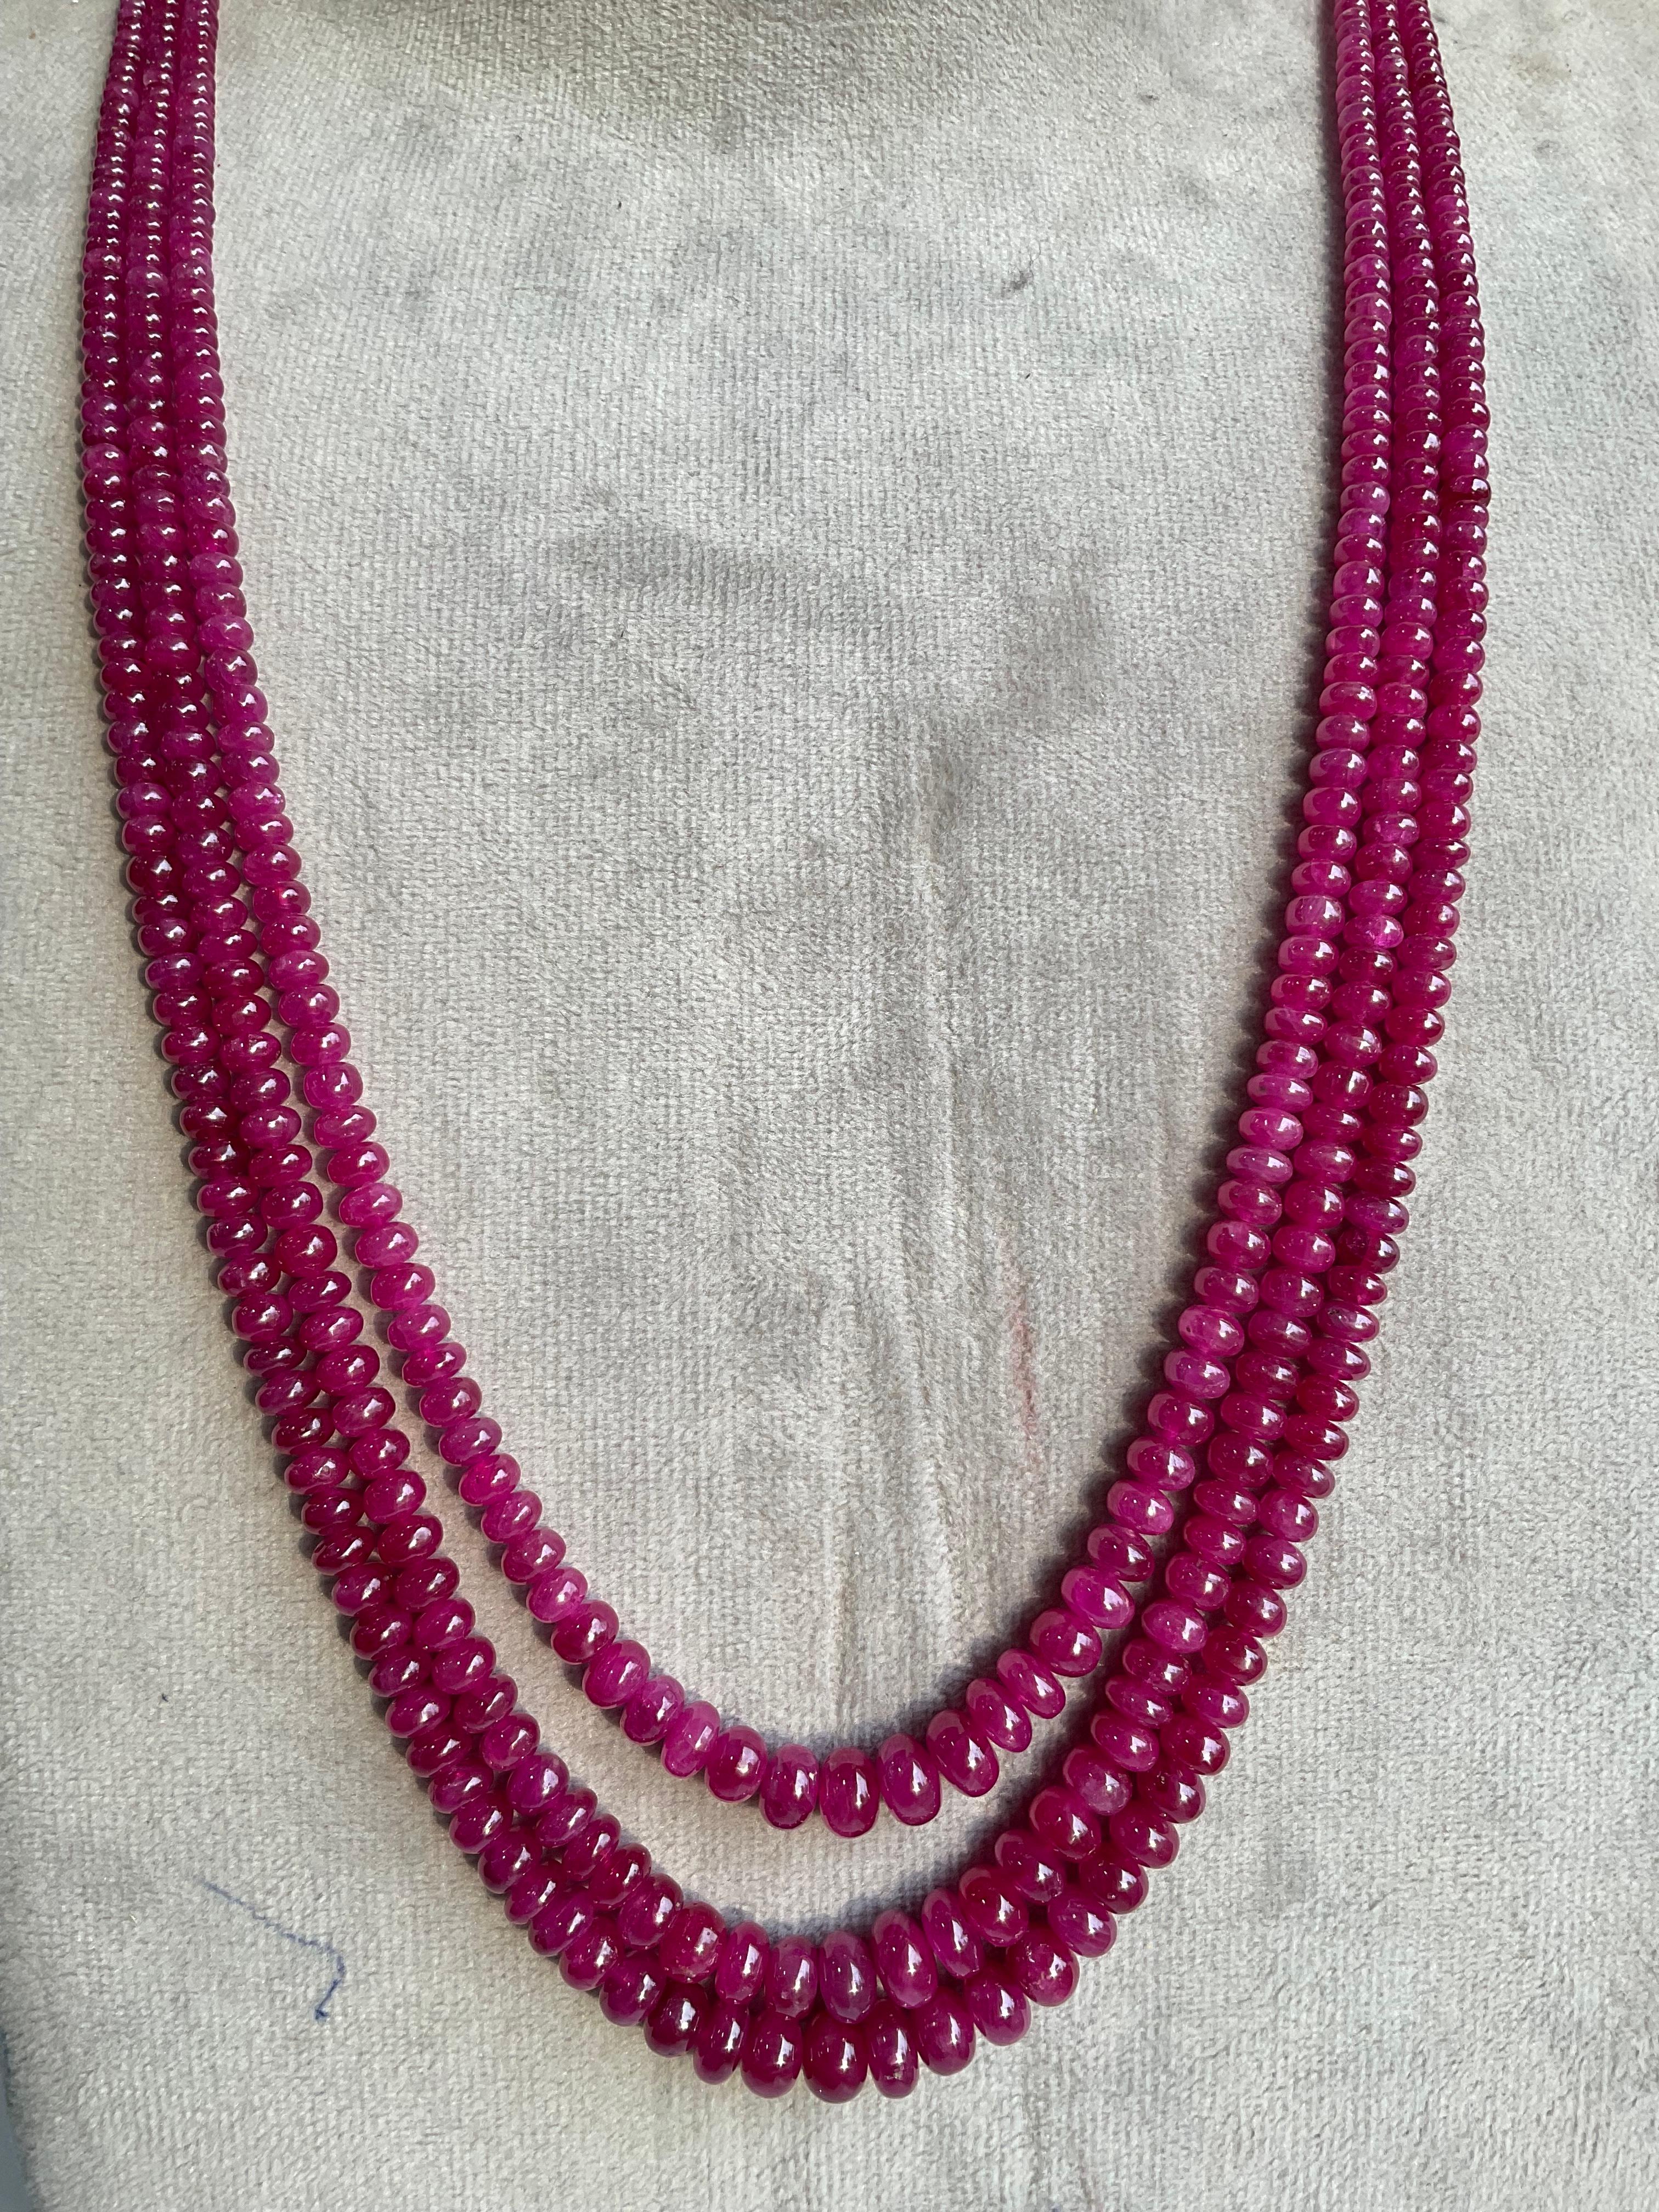 Women's or Men's Burmese Ruby Beaded Jewelry Necklace Rondelle Beads Gem Quality